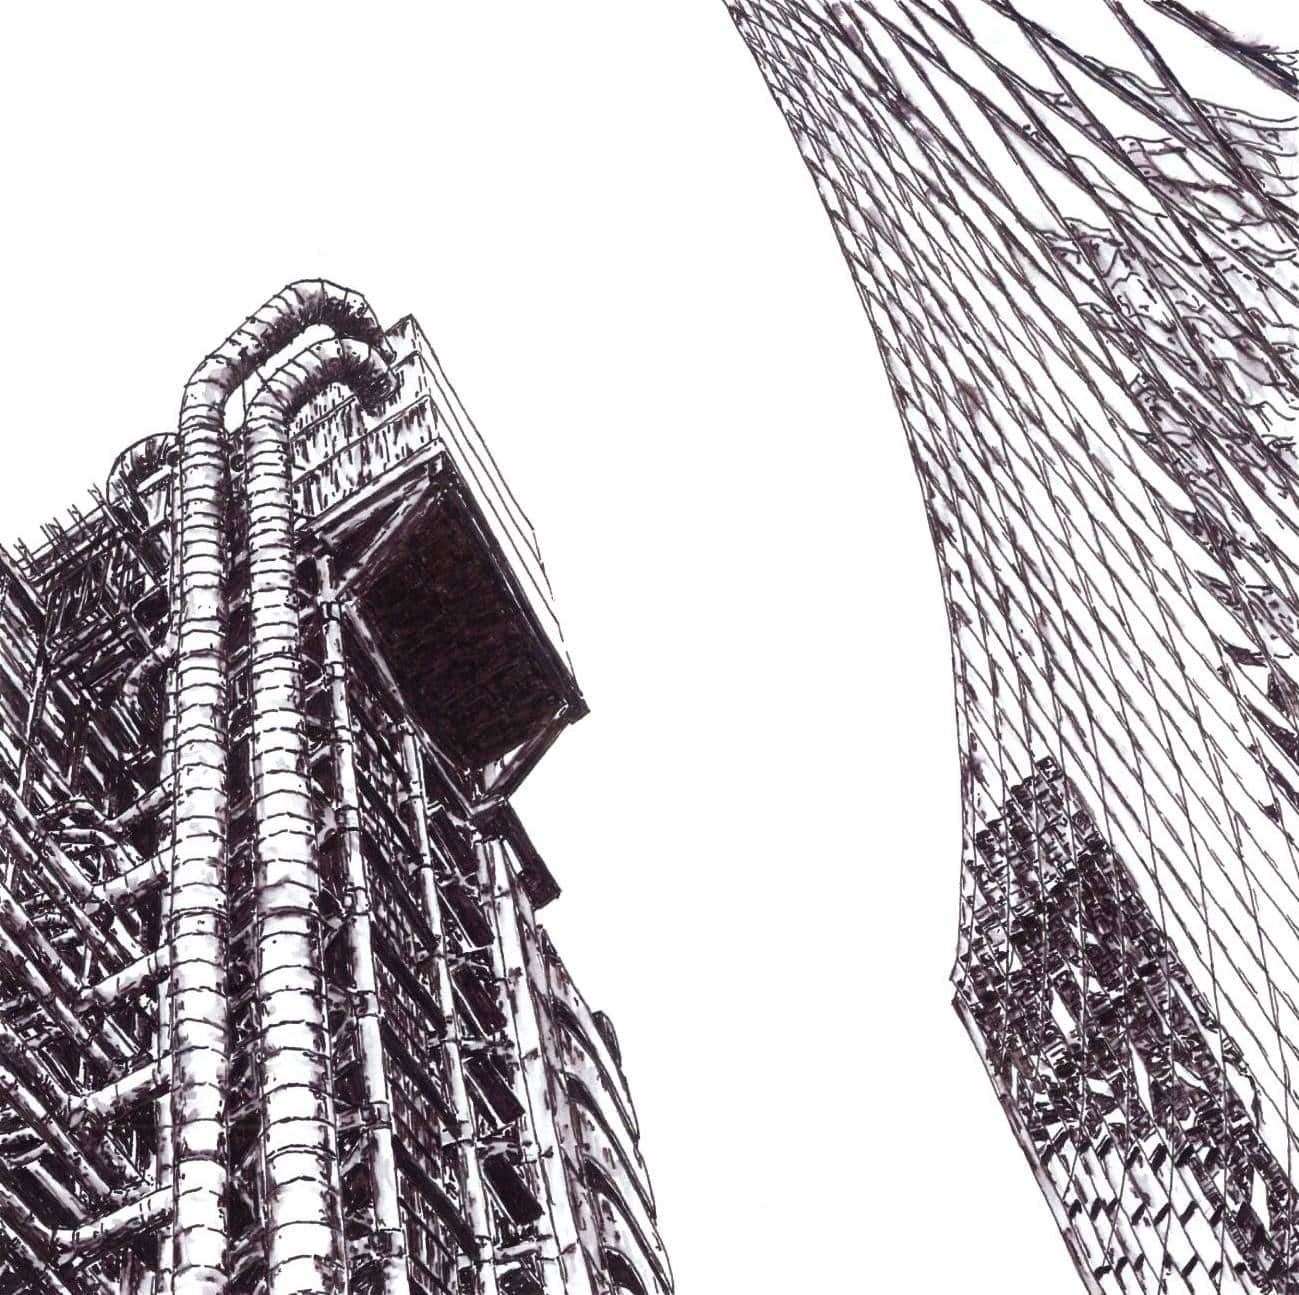 Jack Hines and his intricate drawings of London buildings